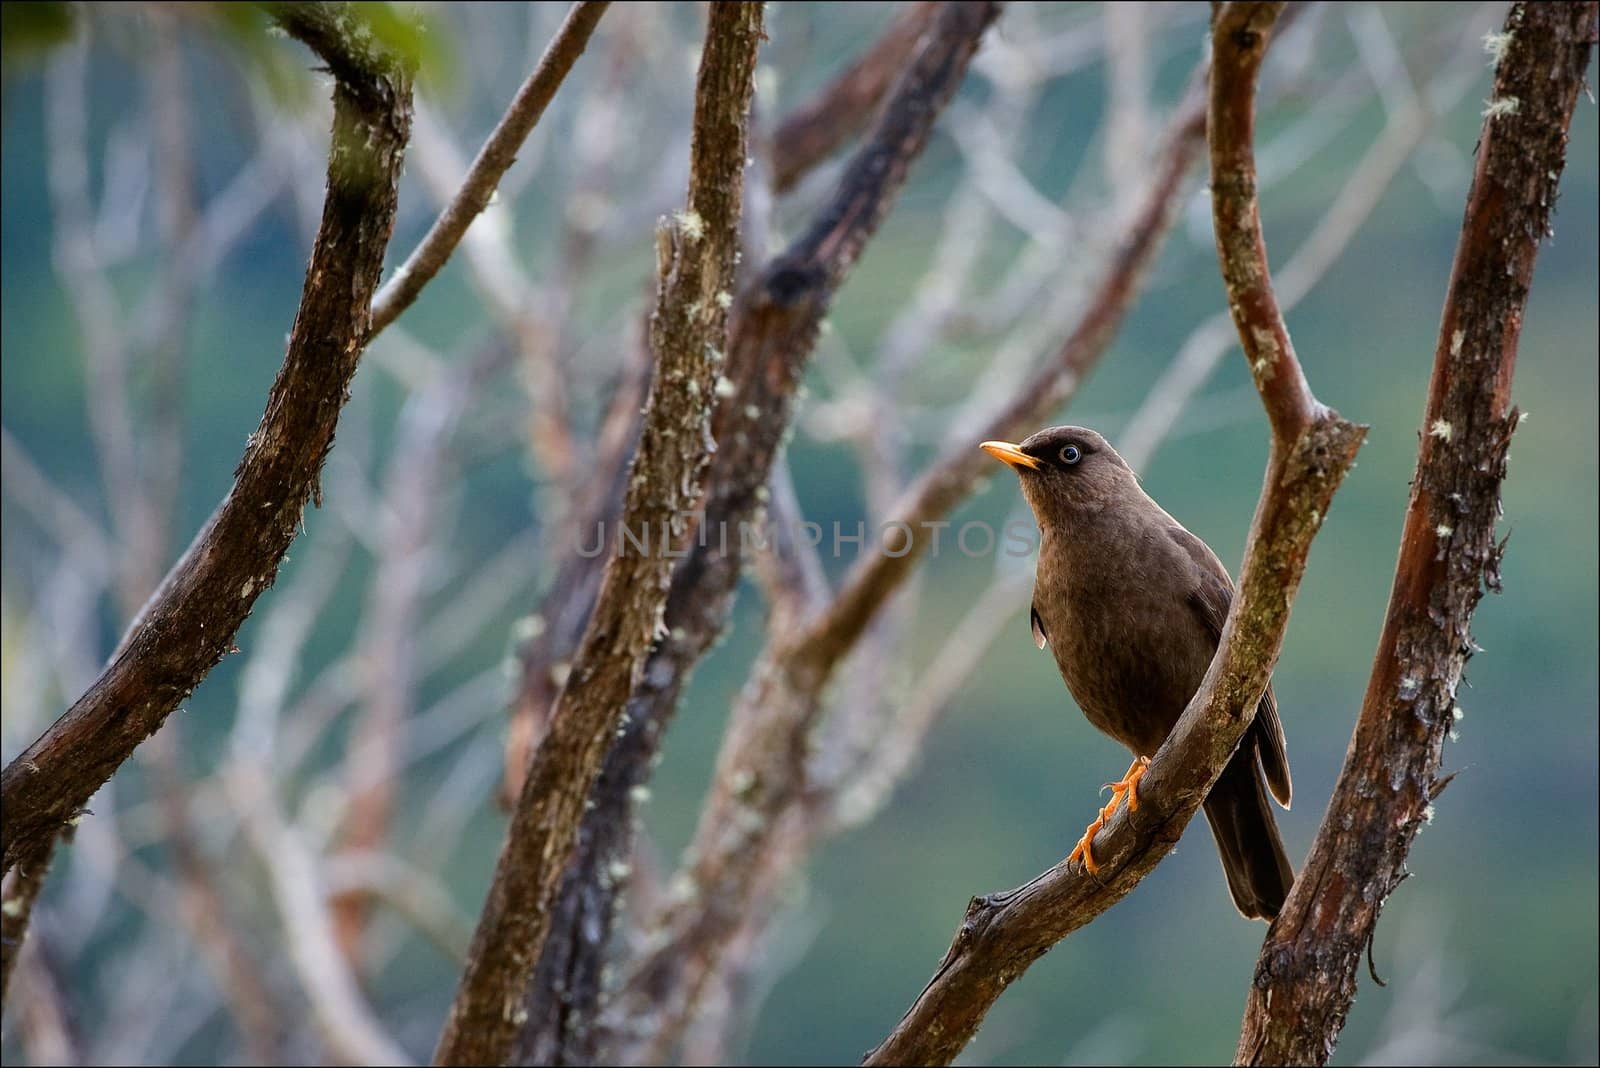 The Sooty Thrush (Turdus nigrescens) is a large thrush endemic to the highlands of Costa Rica and western Panama. It was formerly known as the Sooty Robin.  